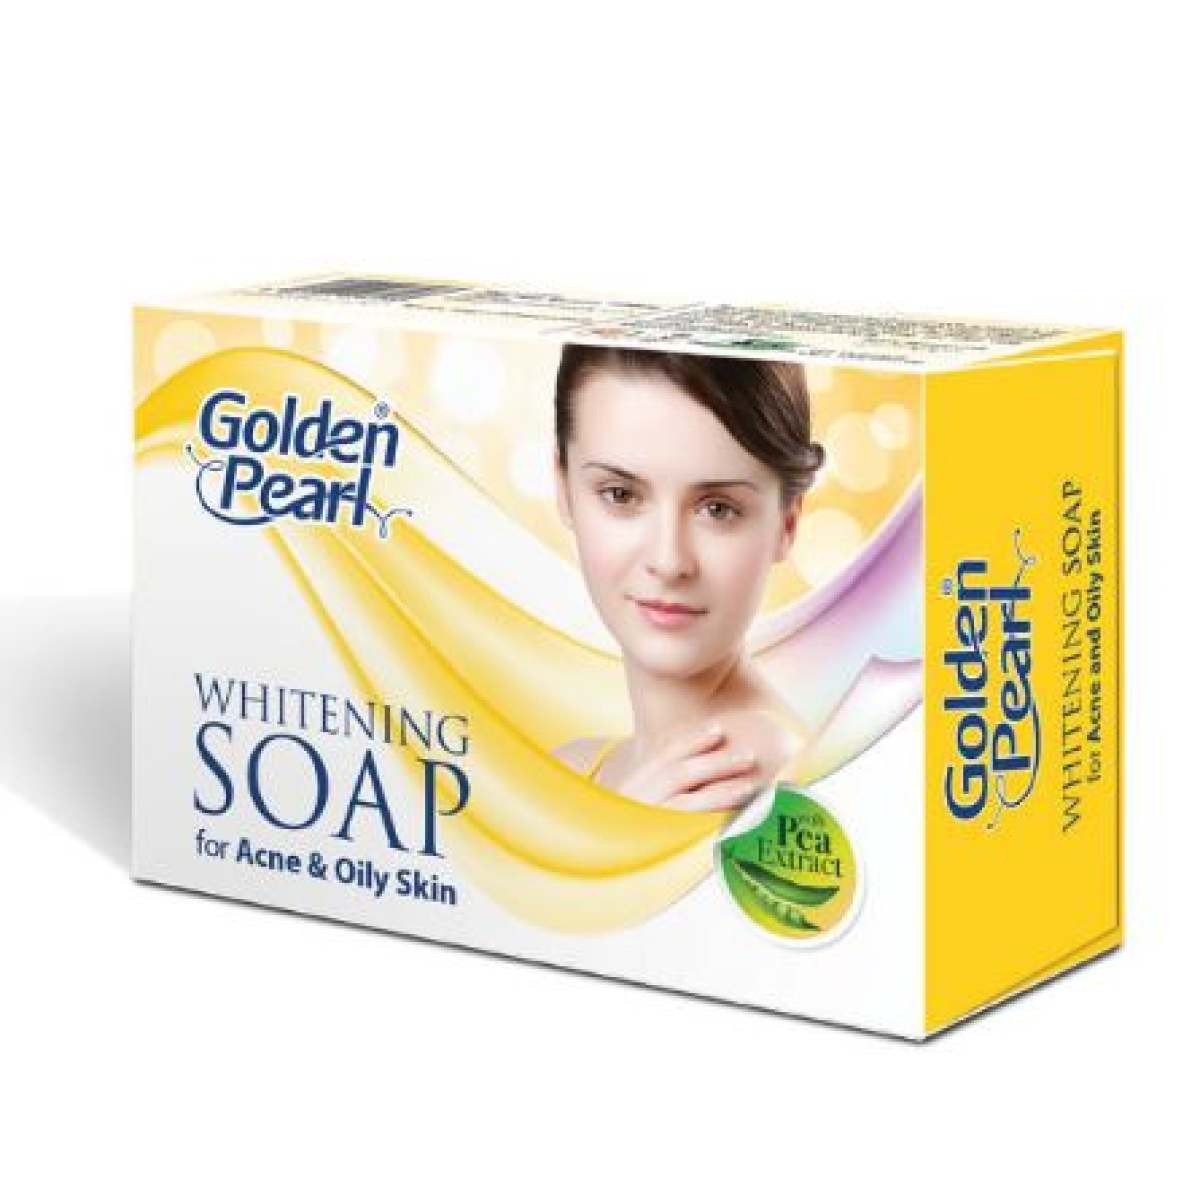 Golden Pearl whitening soap for acne and oily skin